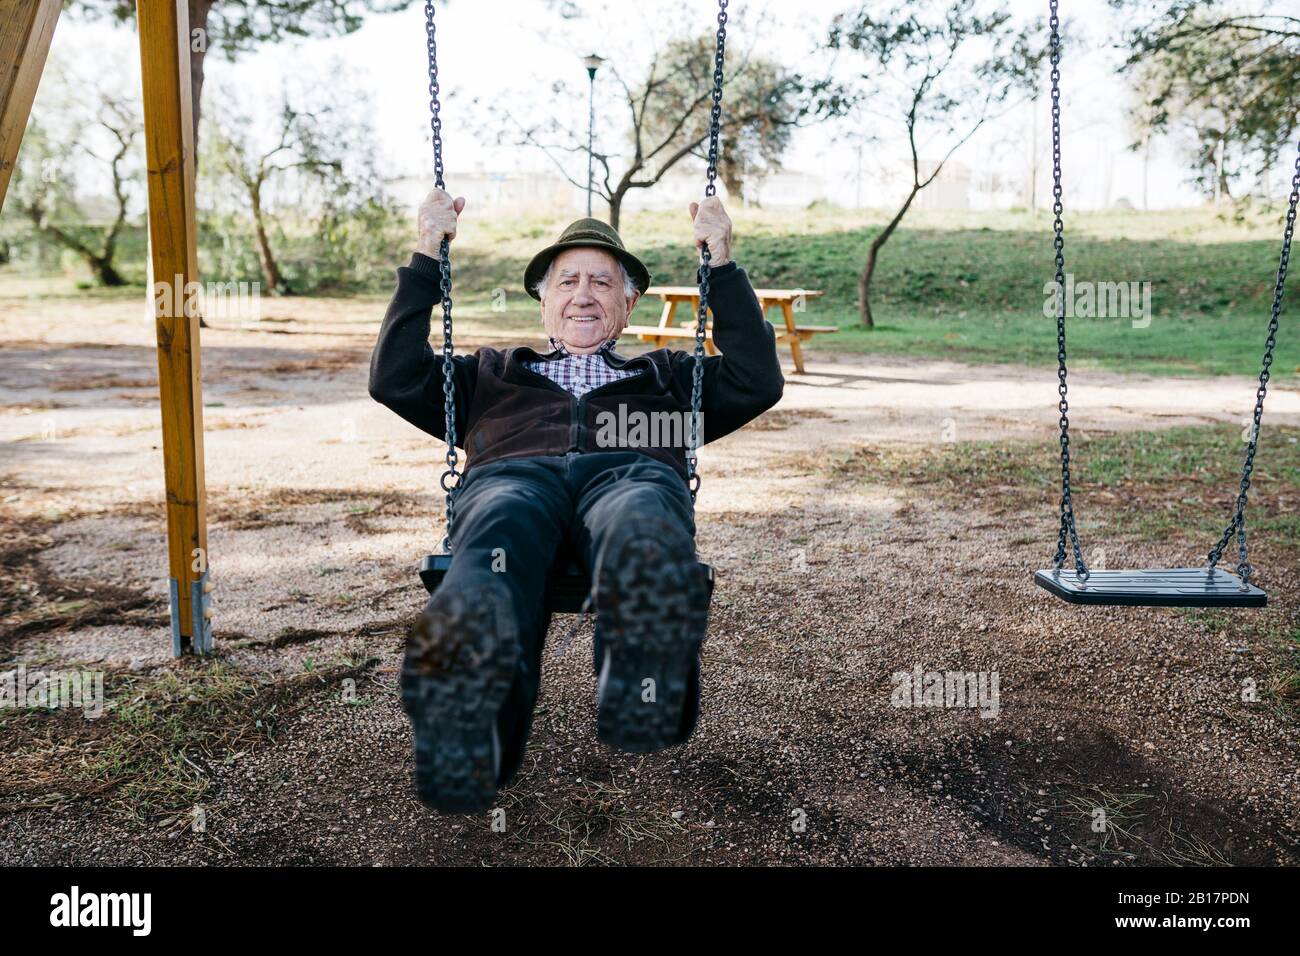 Old man swinging on playground in park Stock Photo